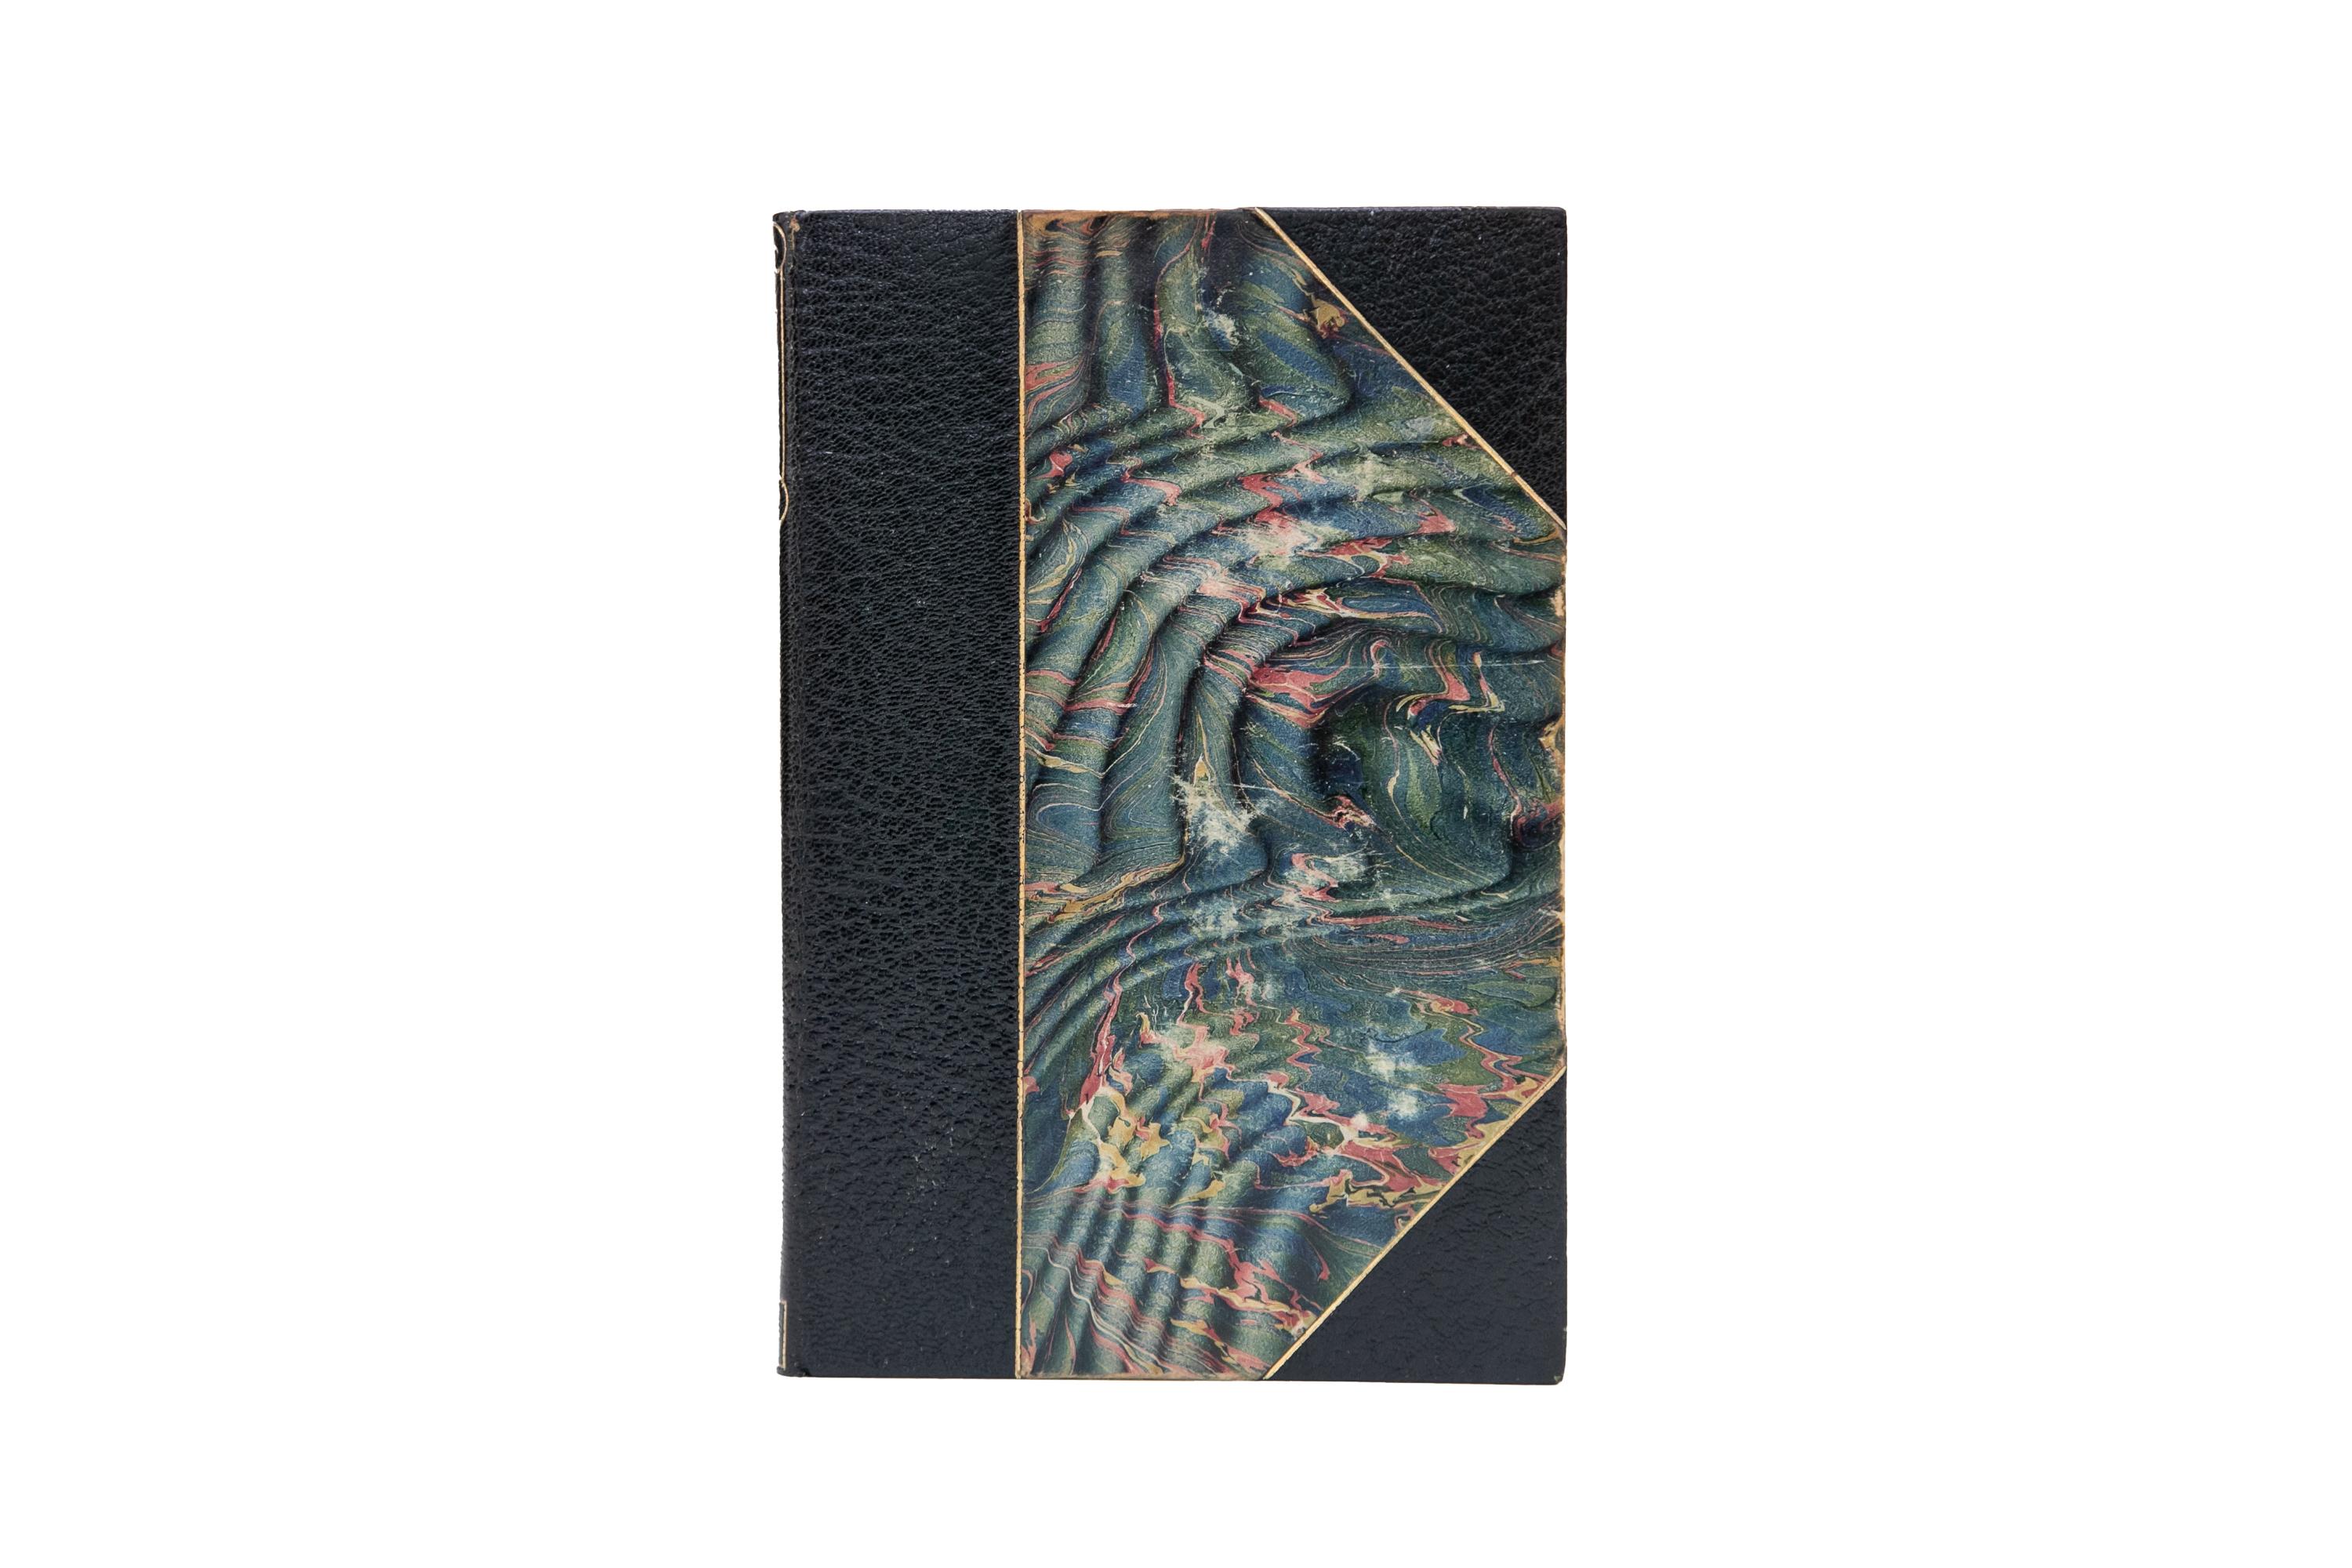 19 Volumes. Bret Harte, The Writings. Riverside Edition. Bound in 3/4 green Morocco and marbled boards bordered in gilt-tooling. Spines display gilt-tooled detailing. Top edges marbled with marbled endpapers. Portrait frontispiece. Published by